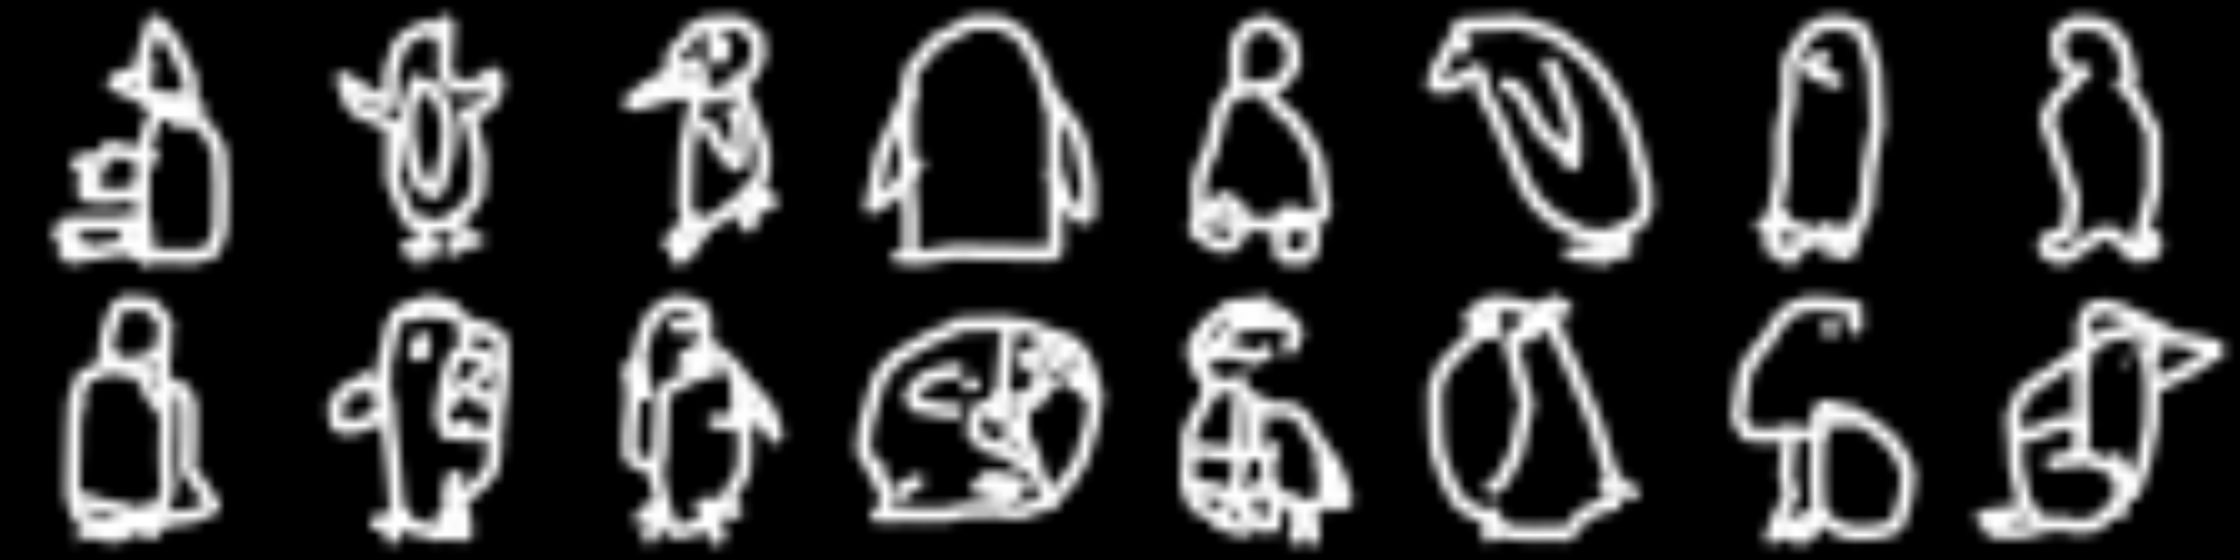 Fig. 8: Penguins, drawn by people (top row) and the network (bottom row).